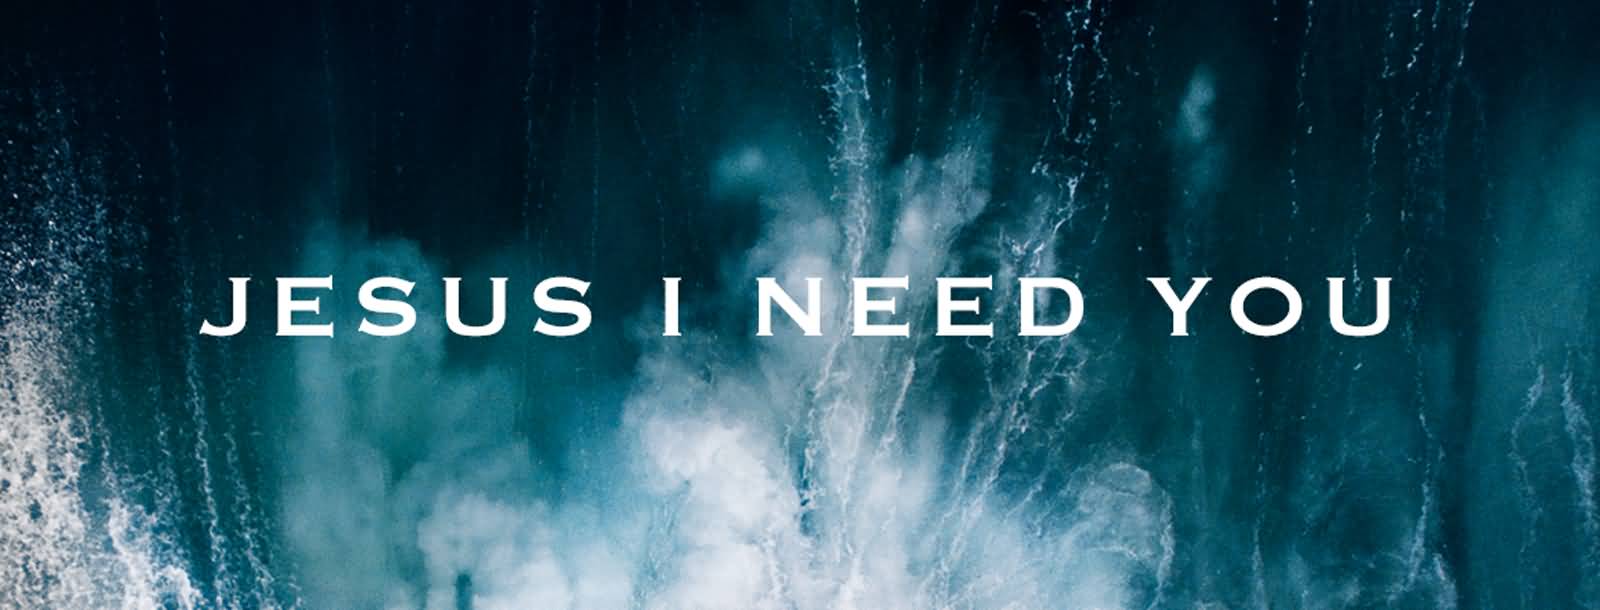 Jesus I Need You Facebook Cover Picture